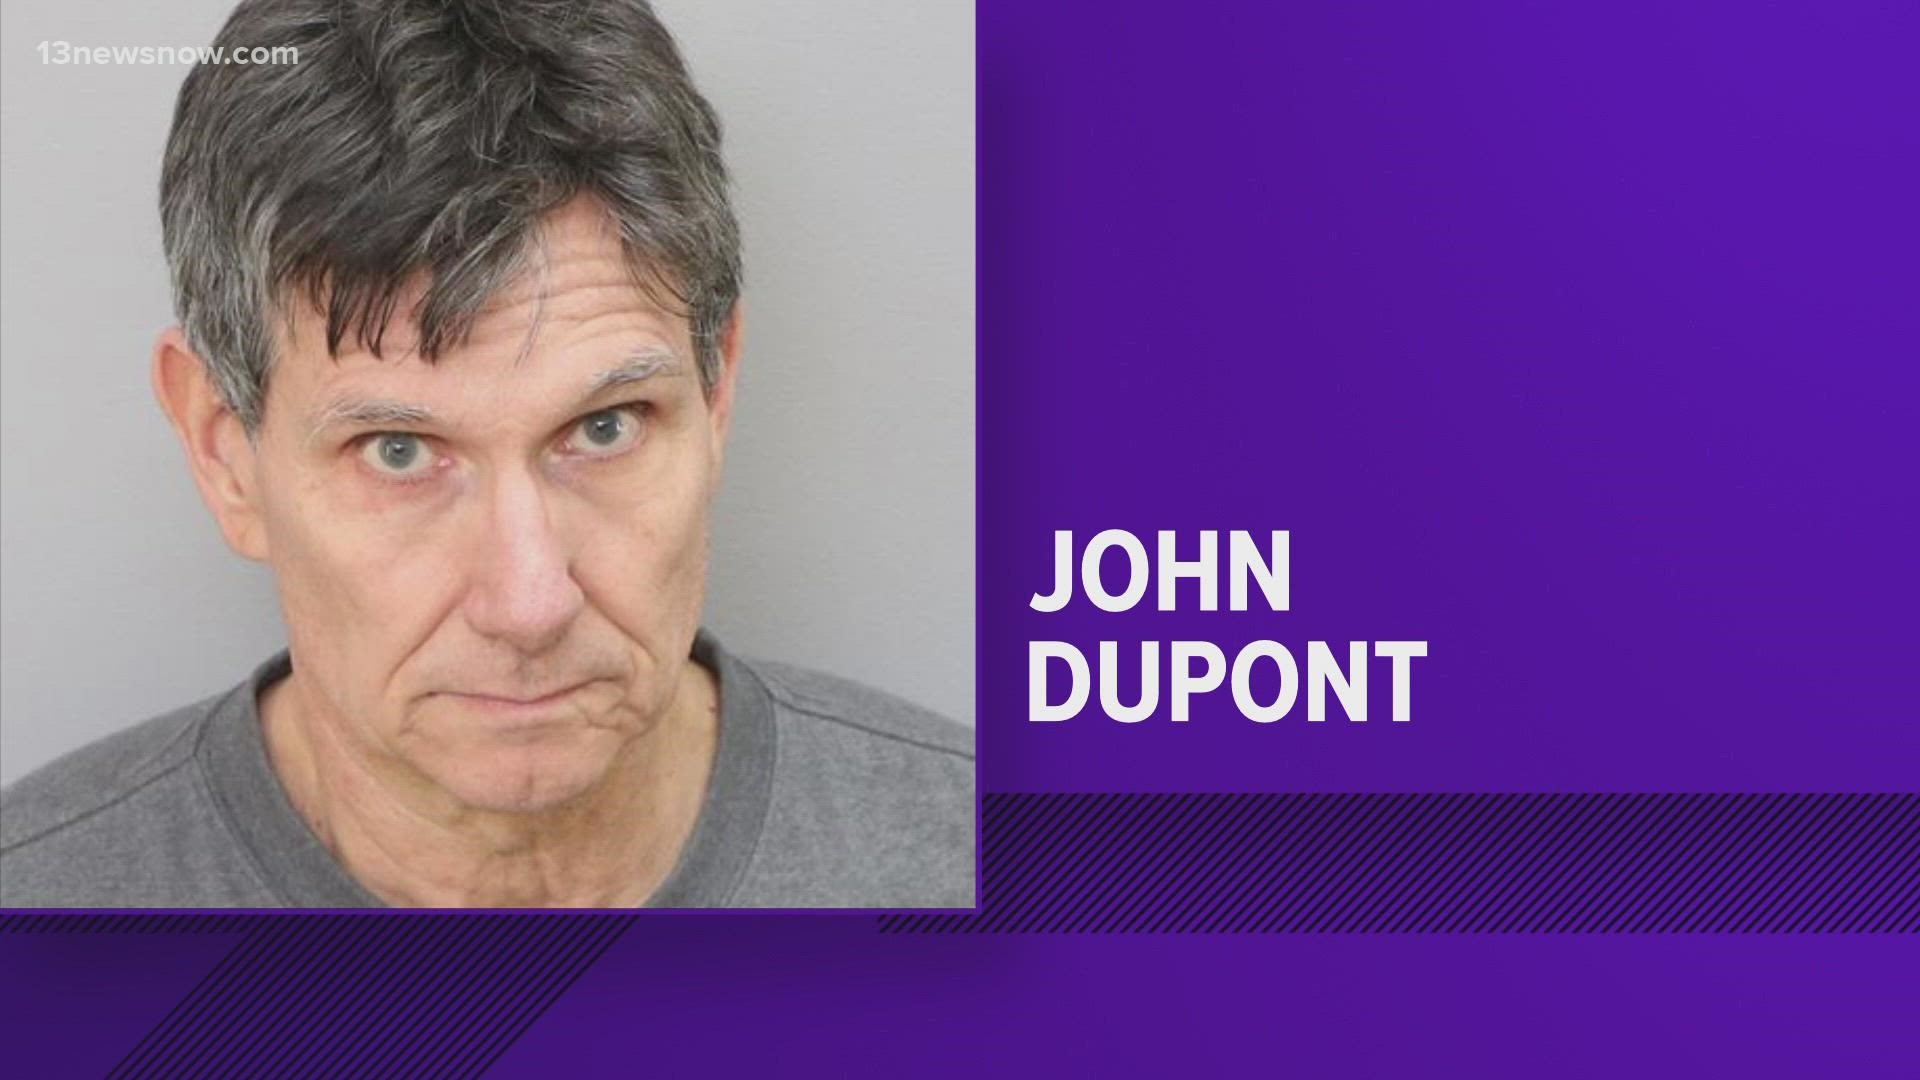 A spokesperson for VB City Public Schools confirms John Dupont teaches technology education at Corporate Landing Middle School, and he is on administrative leave.